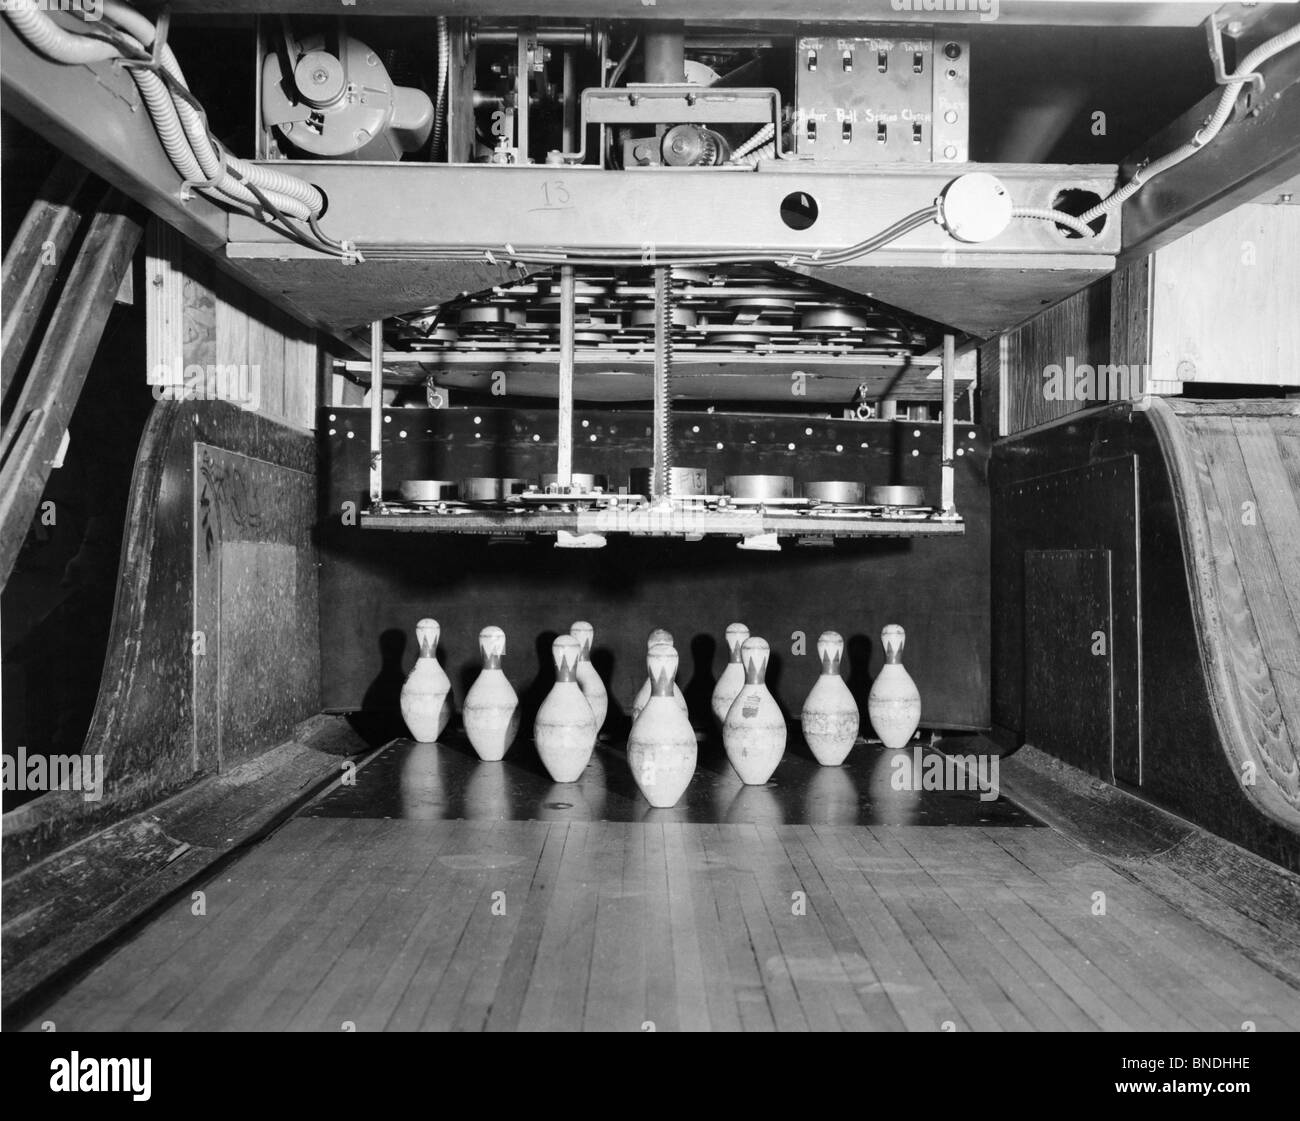 Machinery and bowling pins at the end of a lane Stock Photo